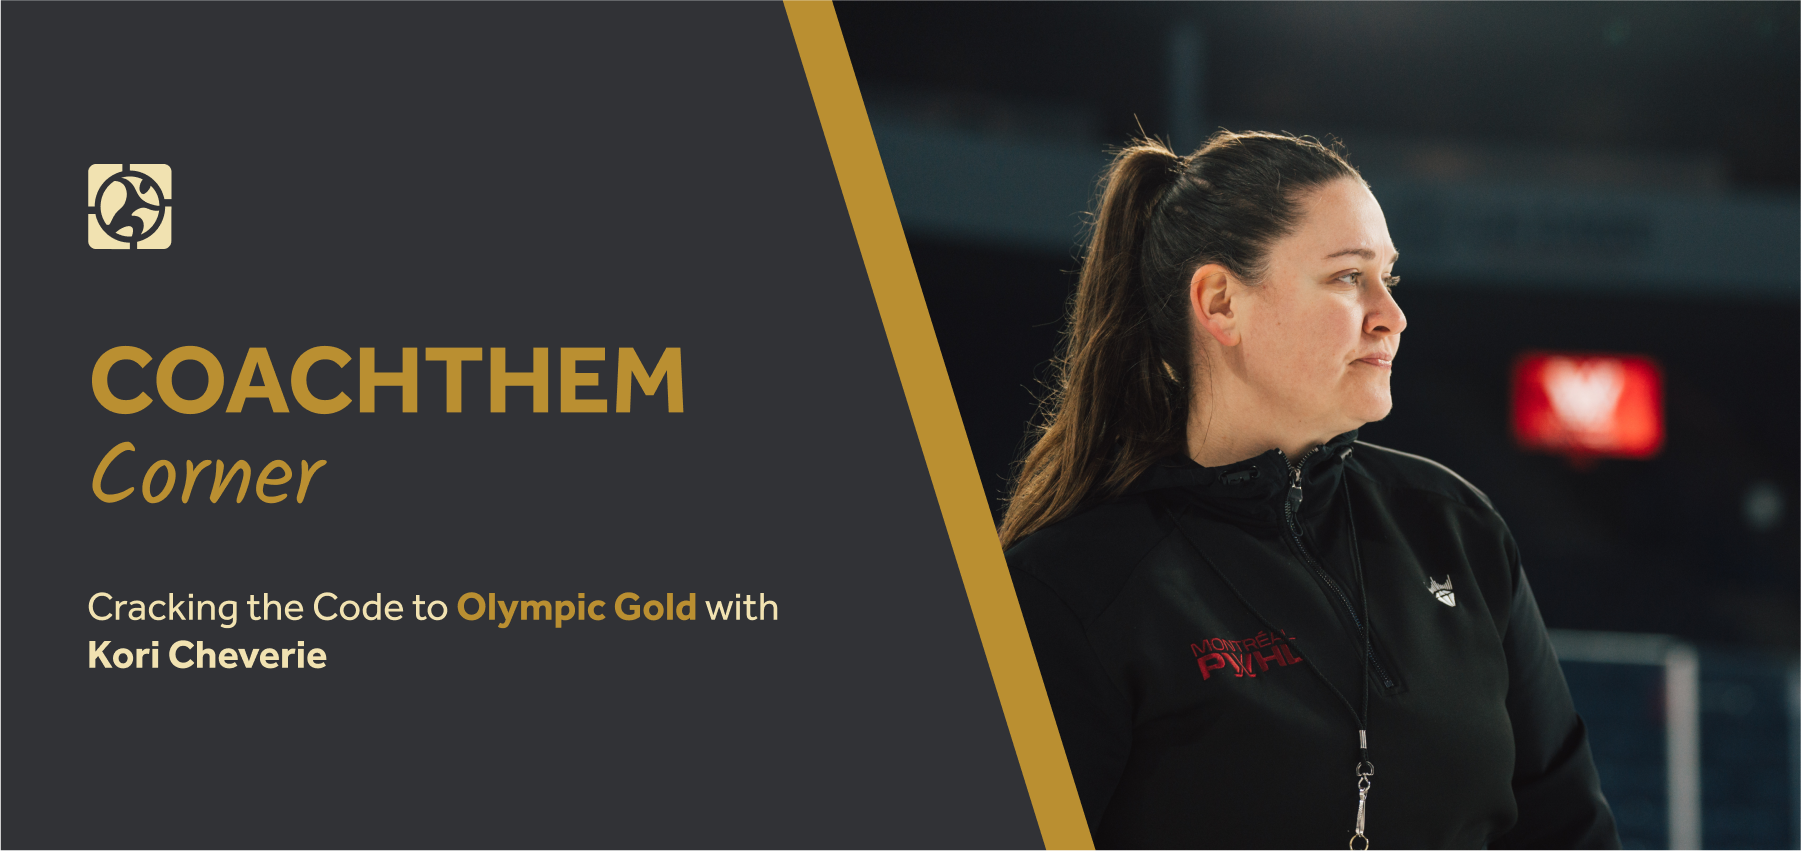 Cracking the Code to Olympic Gold with Kori Cheverie